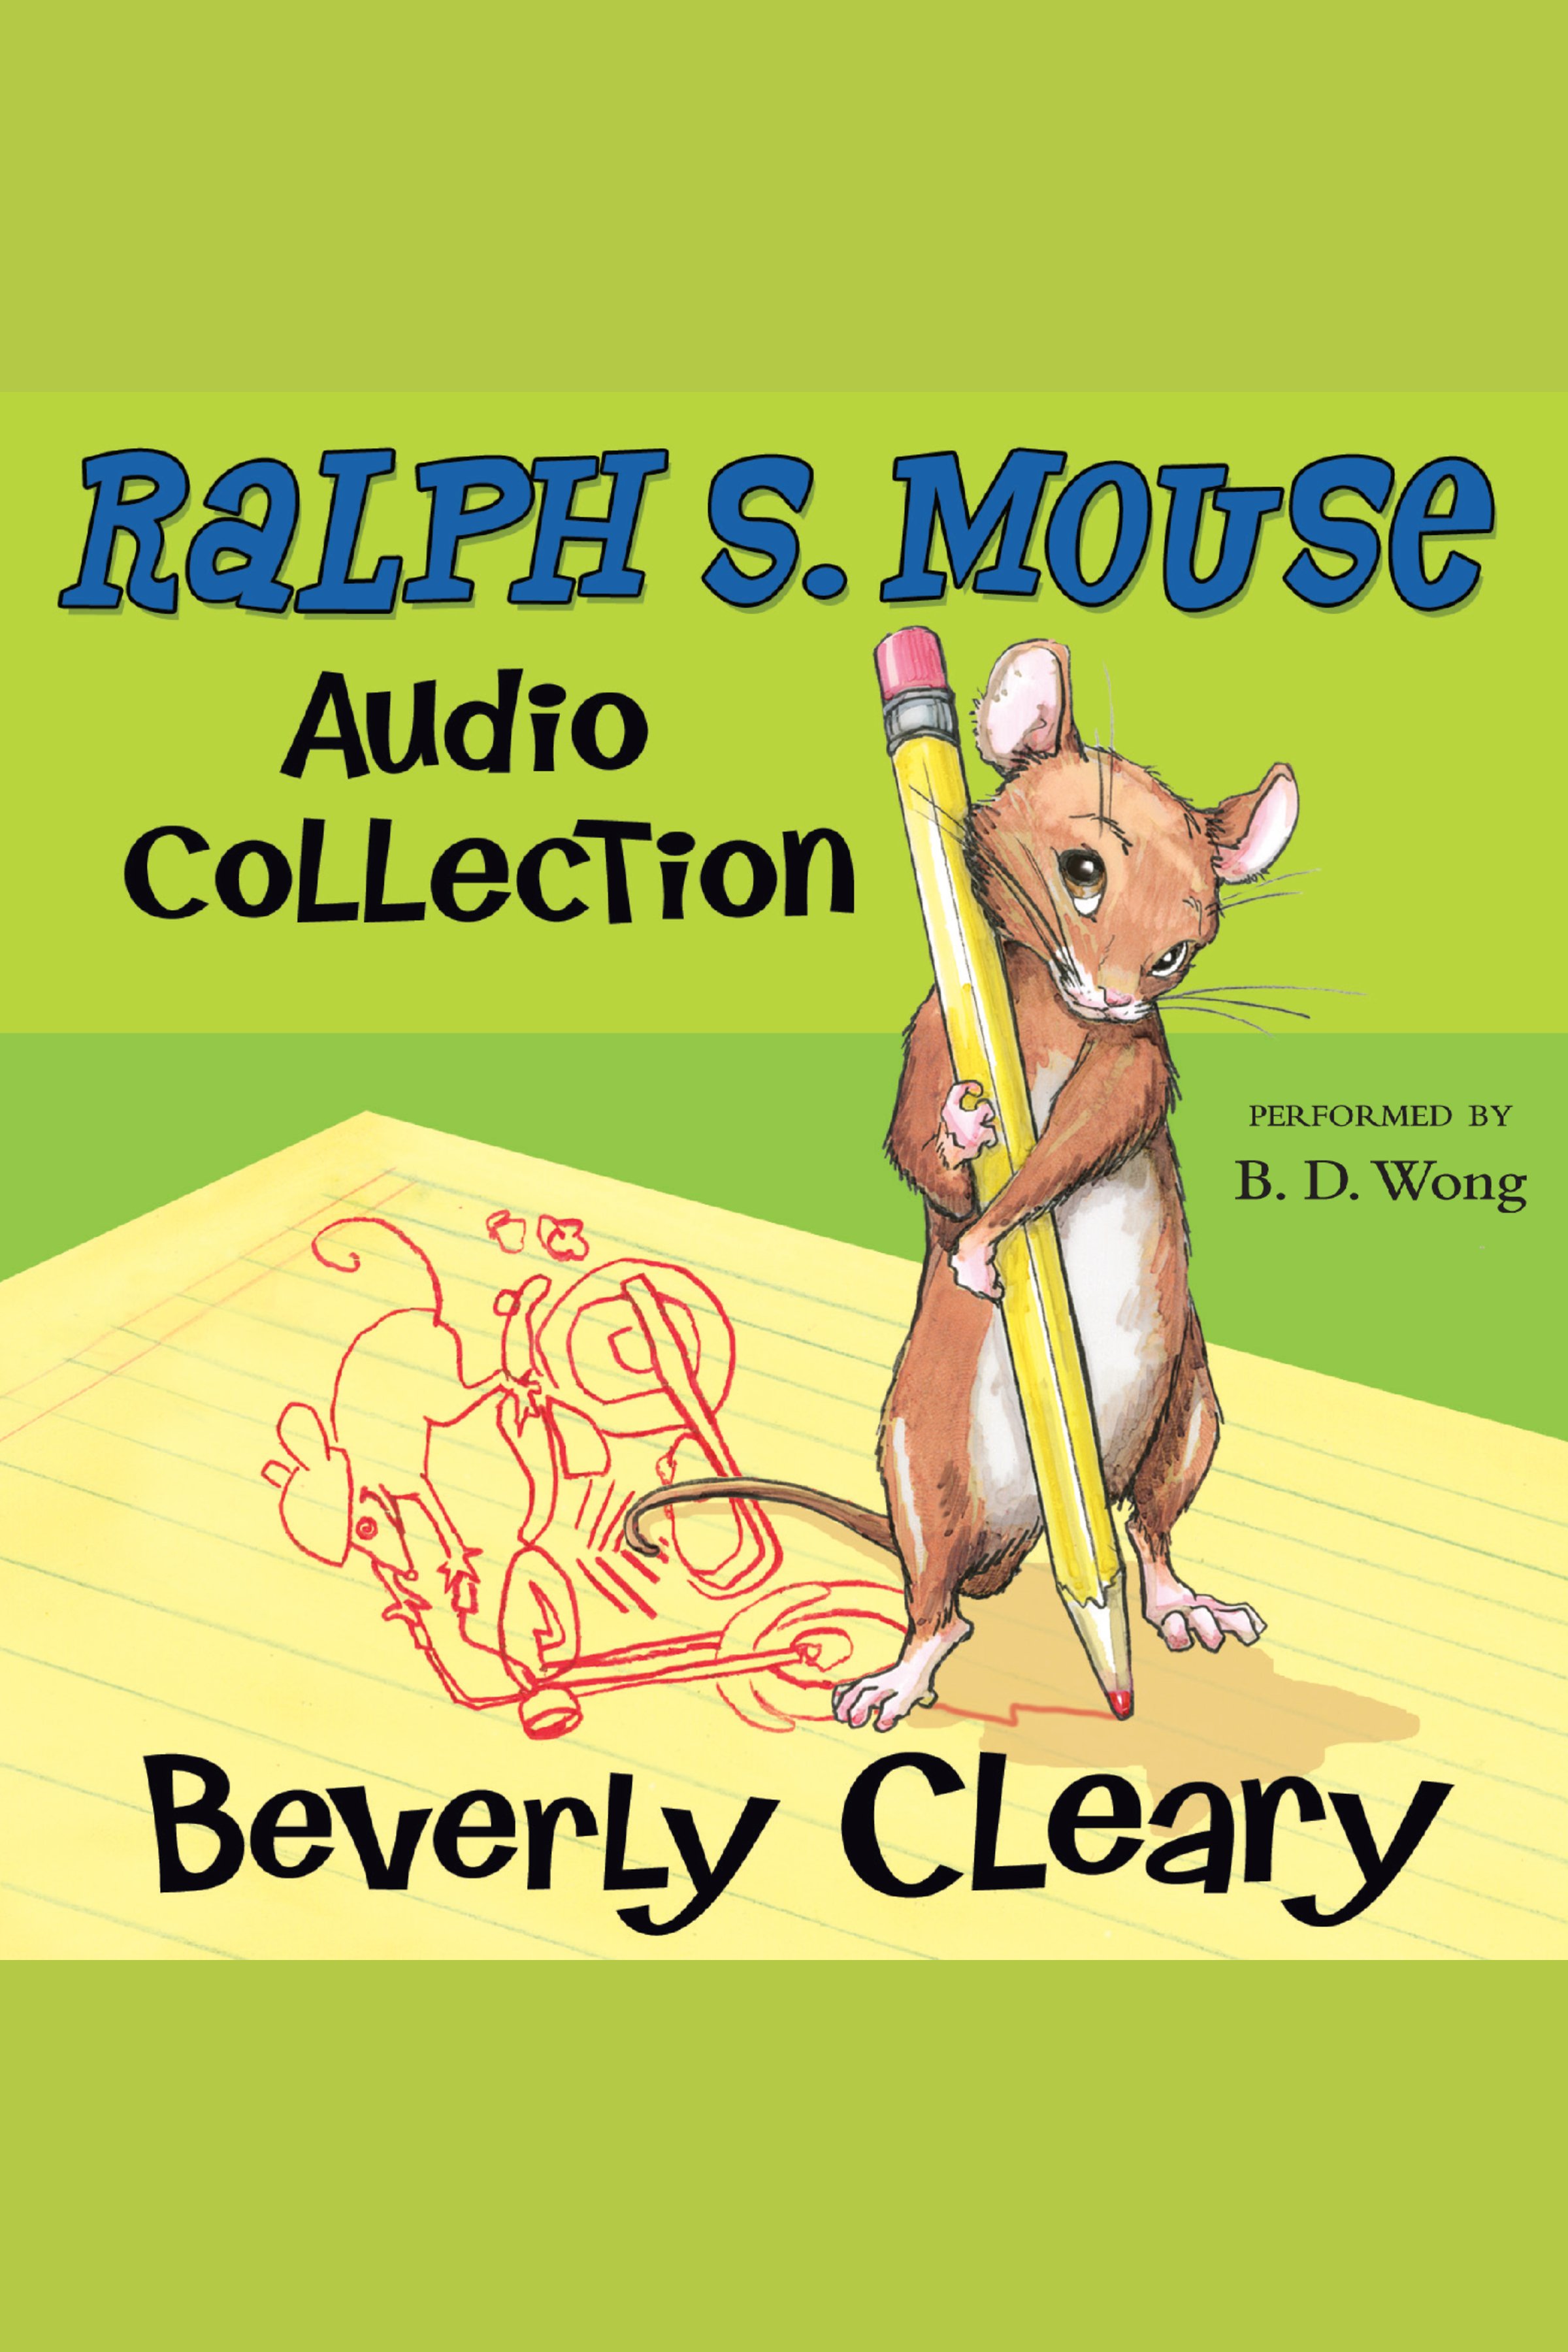 The Ralph S. Mouse audio collection cover image